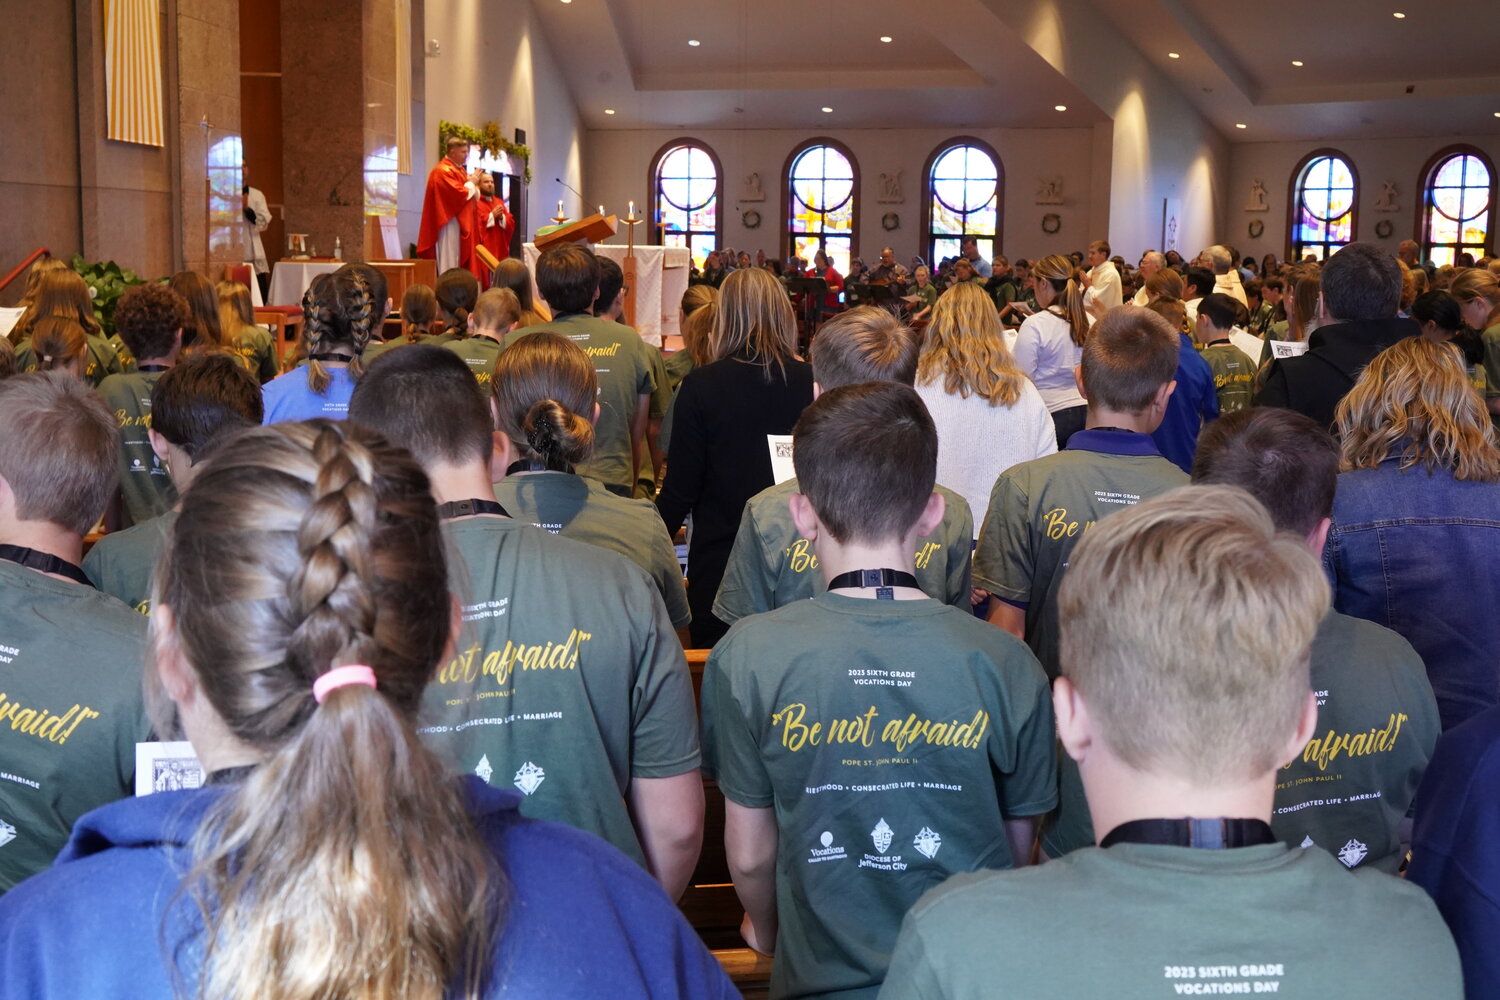 Sixth-graders from throughout the diocese take part in Sixth Grade Vocation Day at Our Lady of Lourdes Church and Our Lady of Lourdes Interparish School in Columbia.